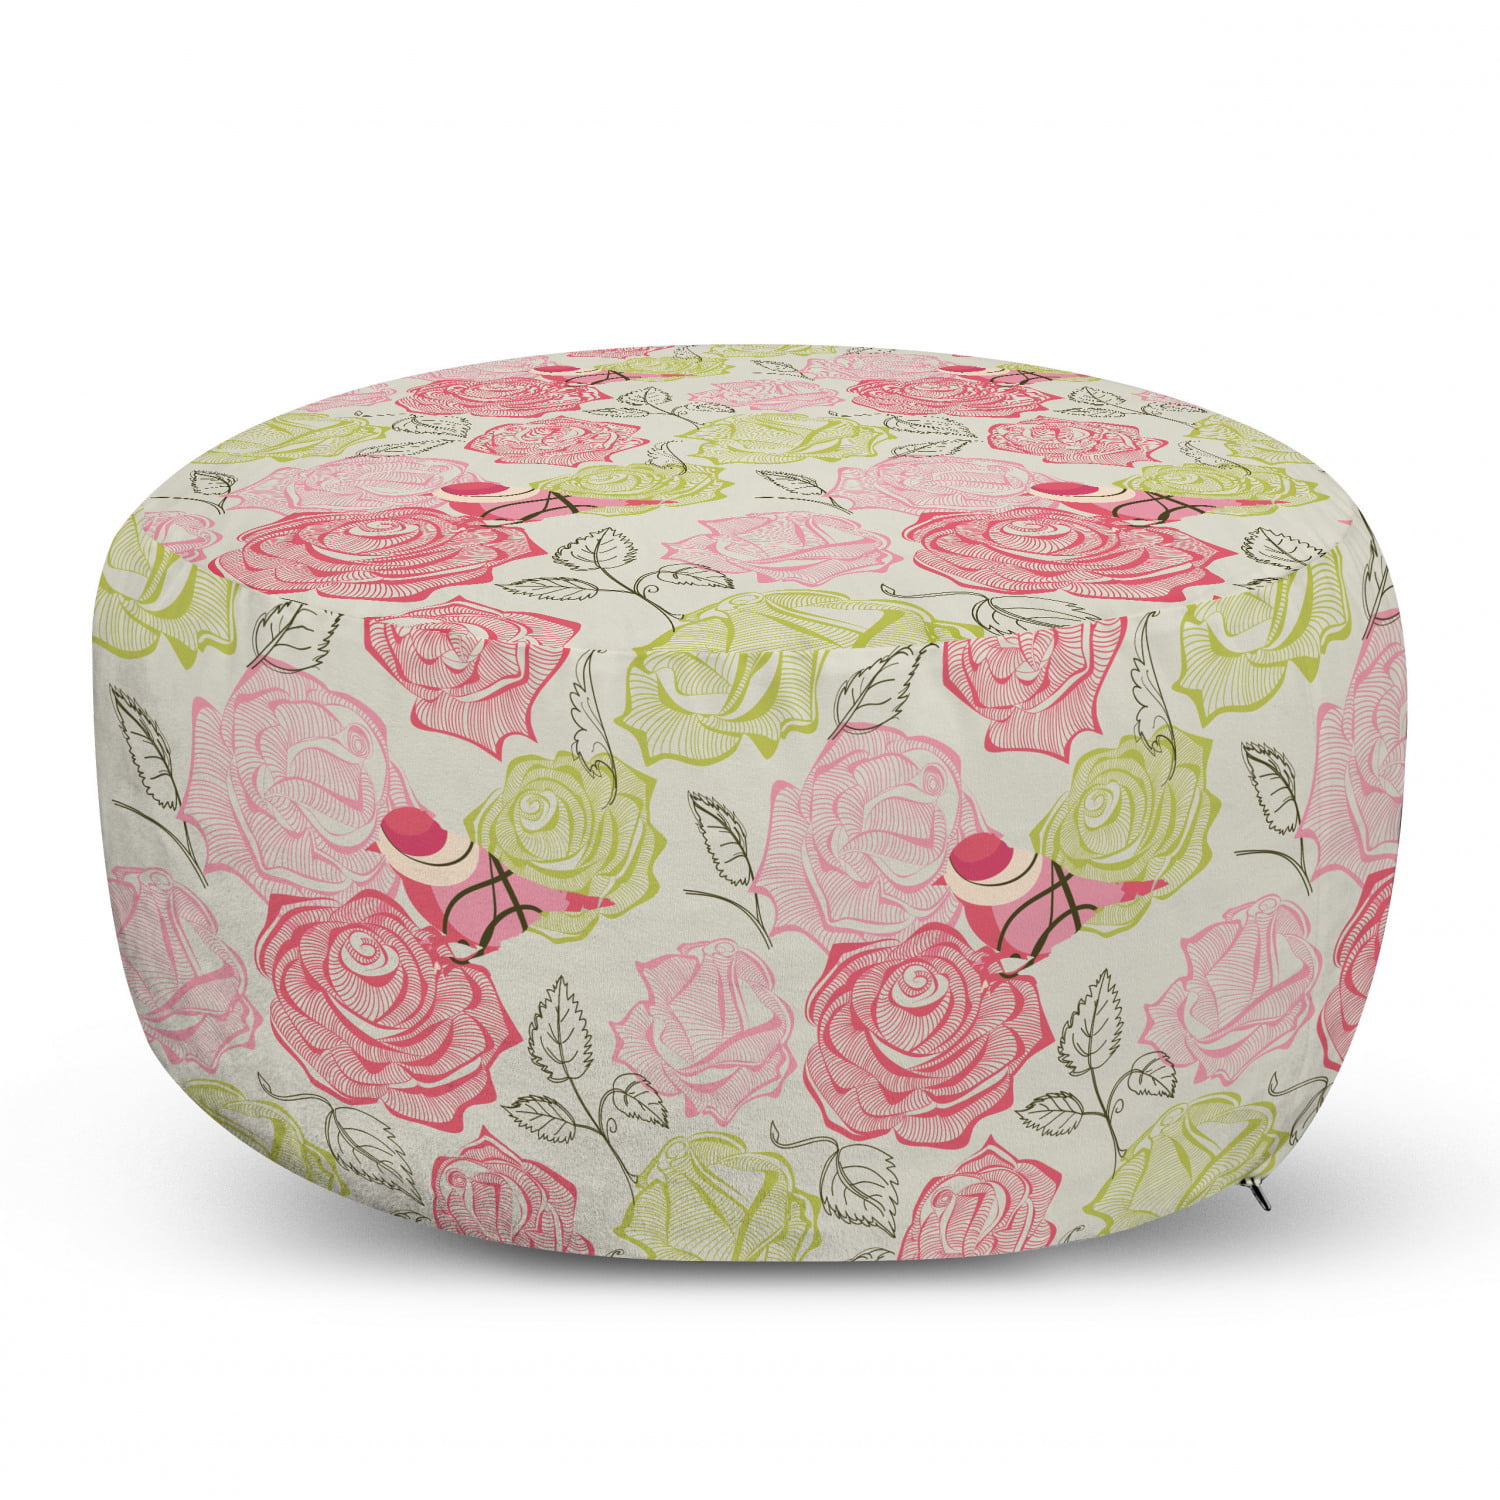 Ambesonne Floral Rectangle Pouf Pastel Green Rose Repetitive Fresh Apples Flowers Soft Pastel Tones Print 25 Under Desk Foot Stool for Living Room Office Ottoman with Cover